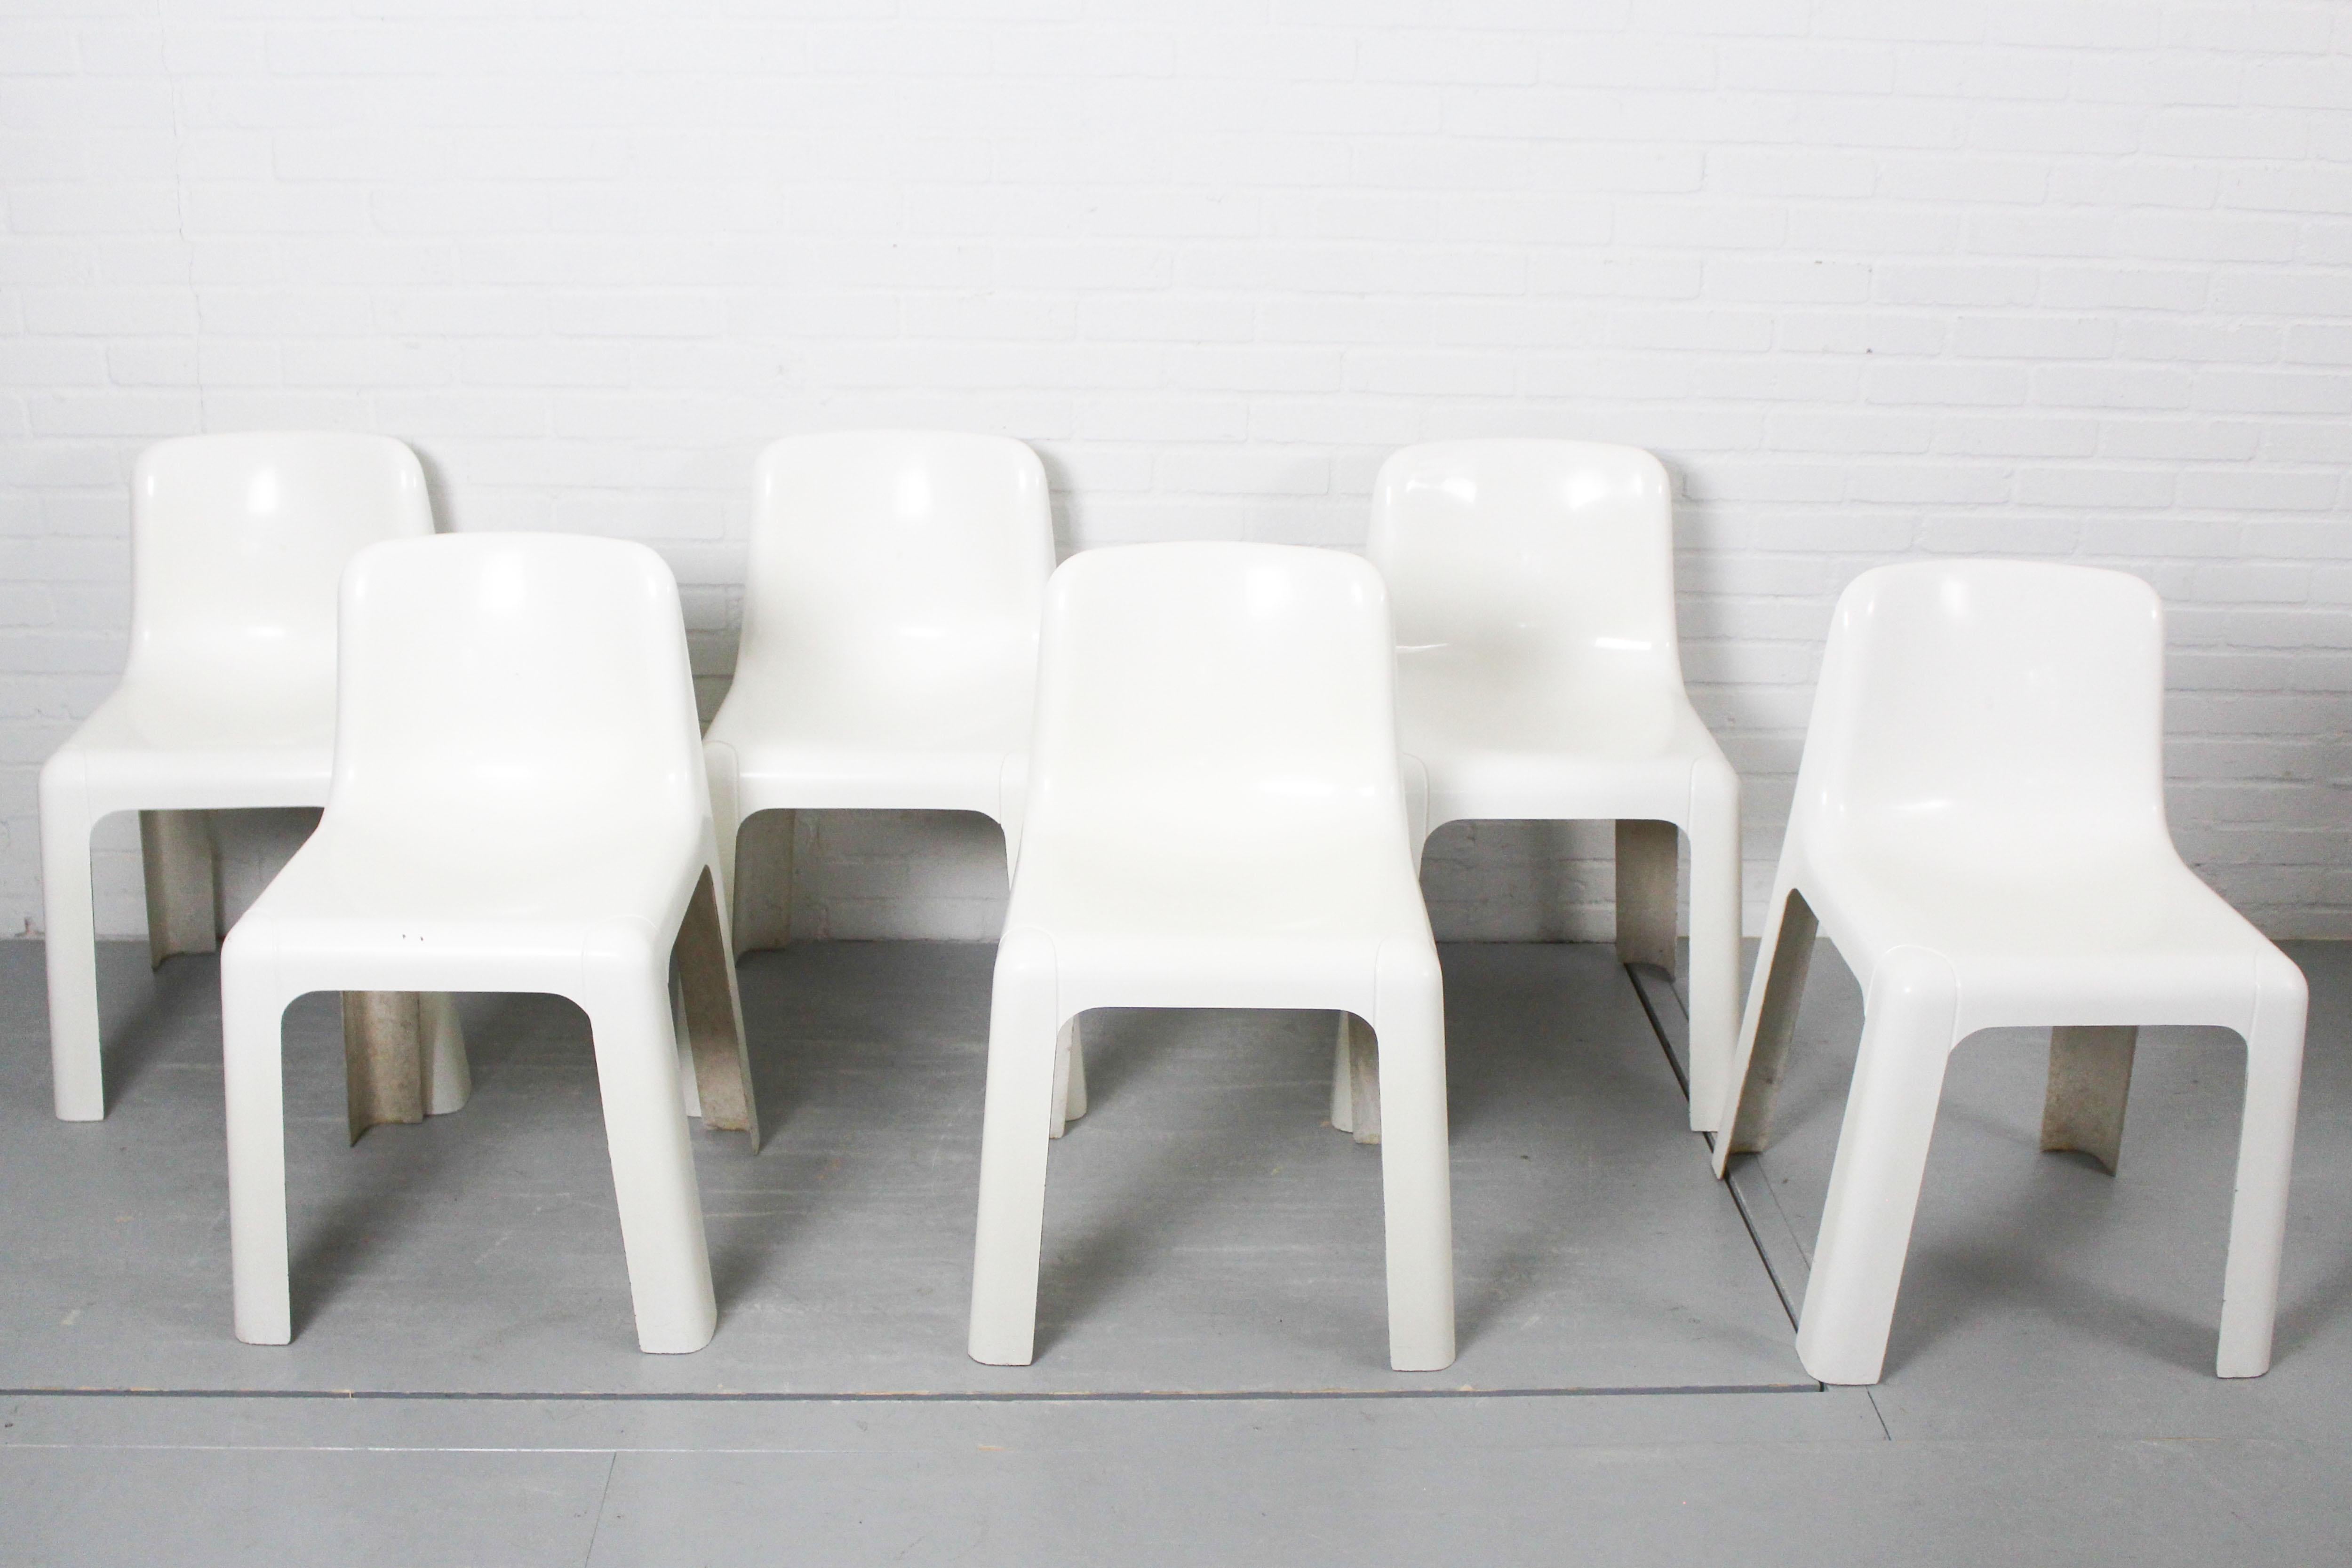 6 OZOO 700 Fiberglass Dining Chairs by Marc Berthier for Roche Bobois, 1970s For Sale 5